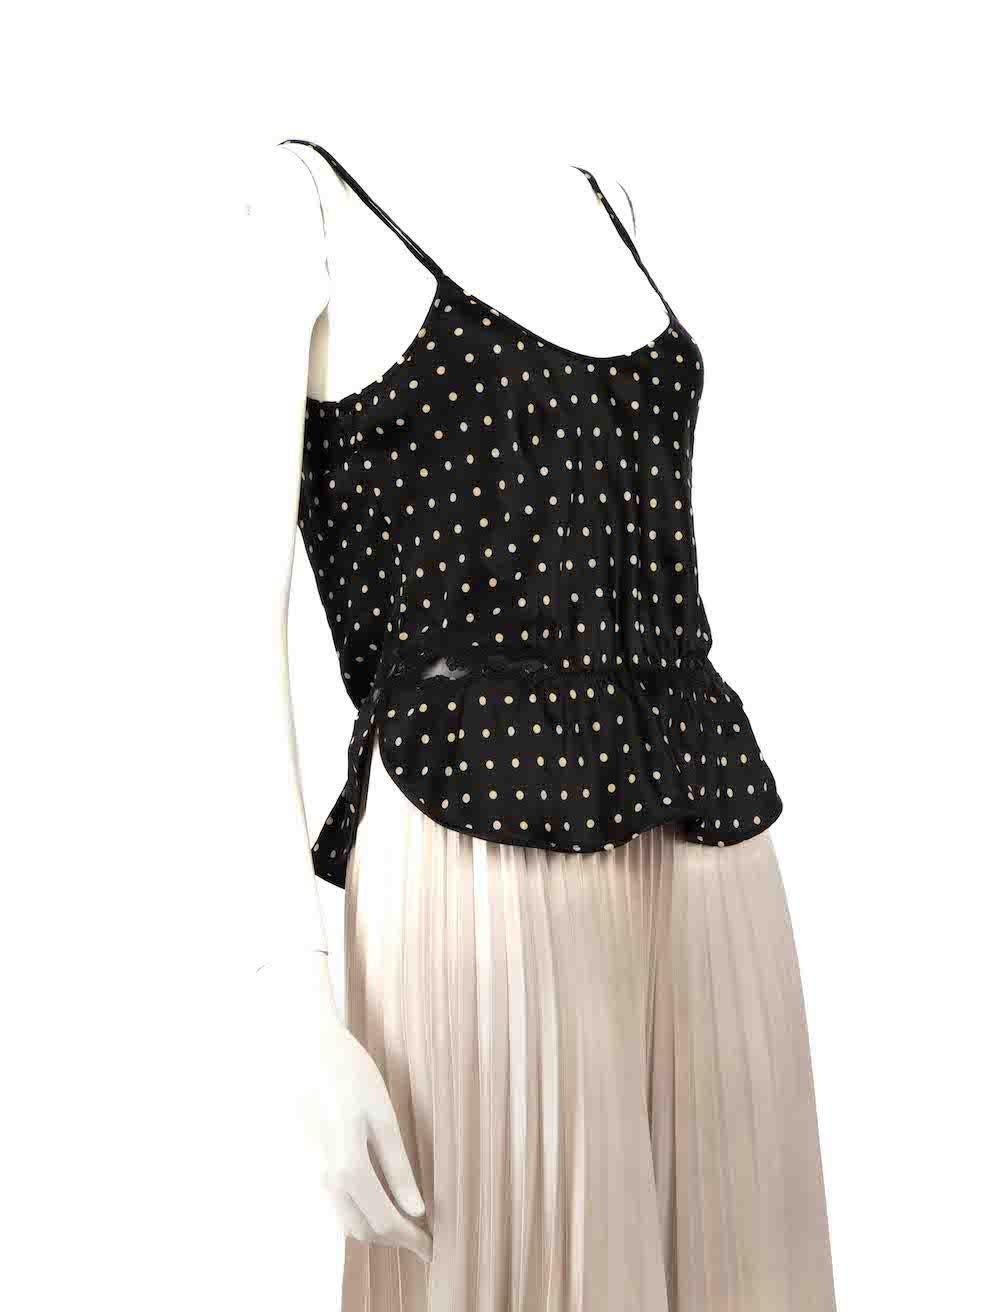 CONDITION is Very good. Hardly any visible wear to top is evident on this used La Perla designer resale item.
 
 
 
 Details
 
 
 Black
 
 Silk
 
 Tank top
 
 Polkadot pattern
 
 Sleeveless
 
 Elasticated waist
 
 Round neck
 
 
 
 
 
 Made in